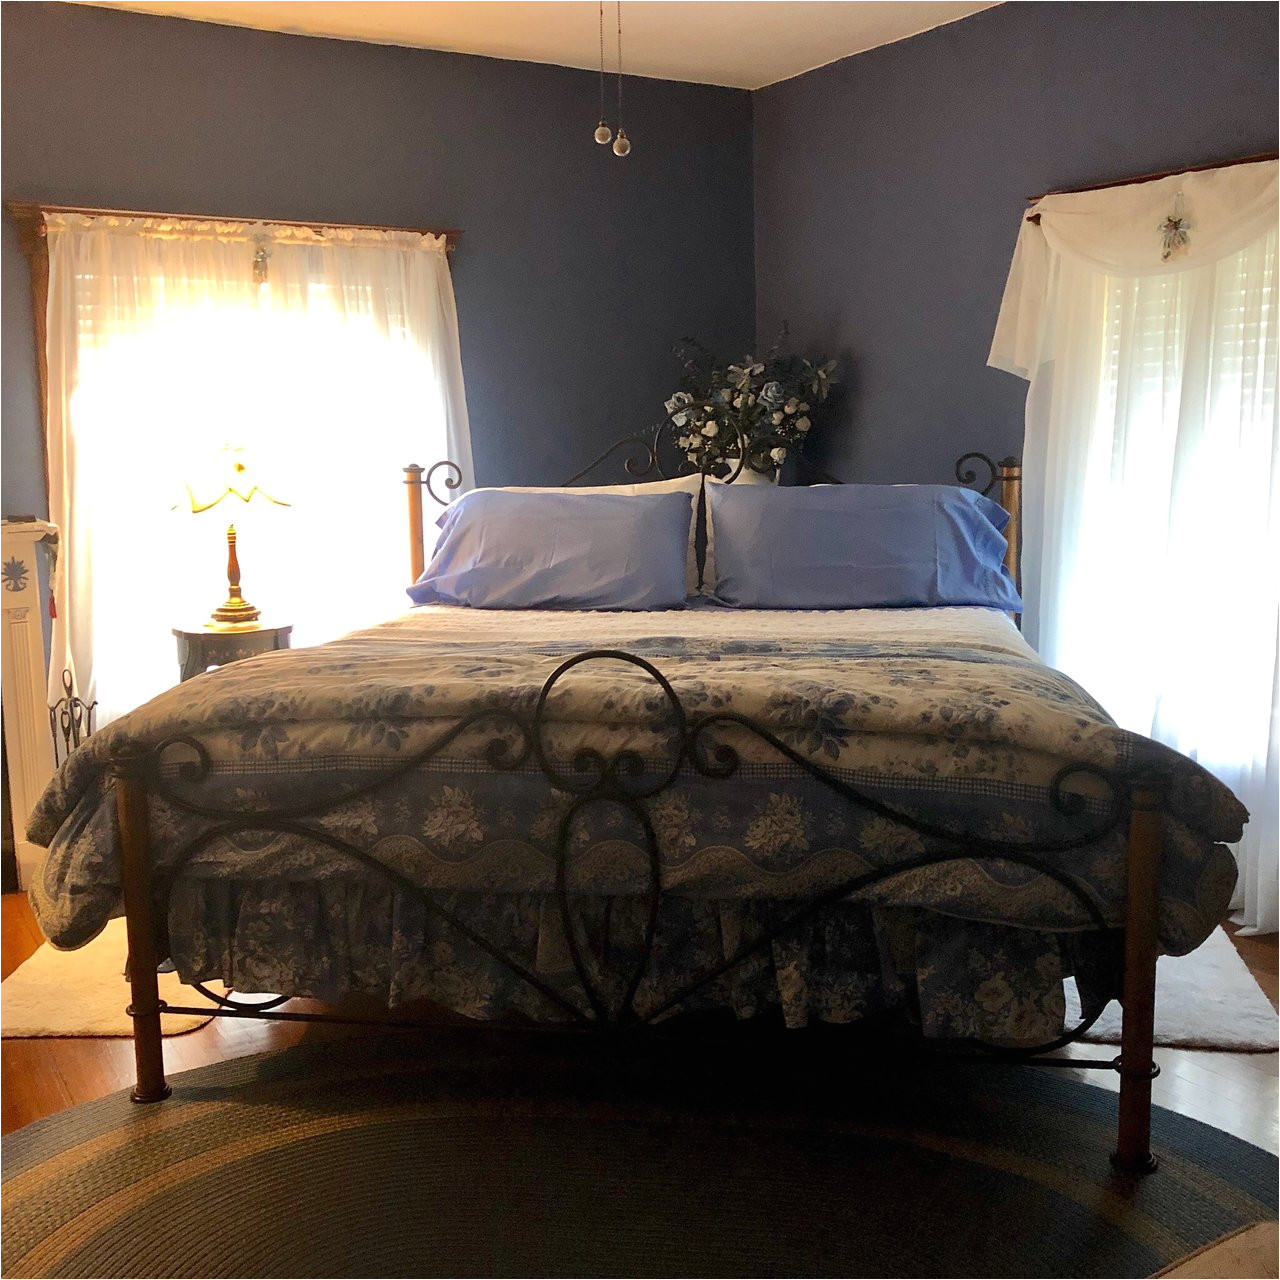 somewhere in time bed and breakfast prices b b reviews lexington ohio tripadvisor